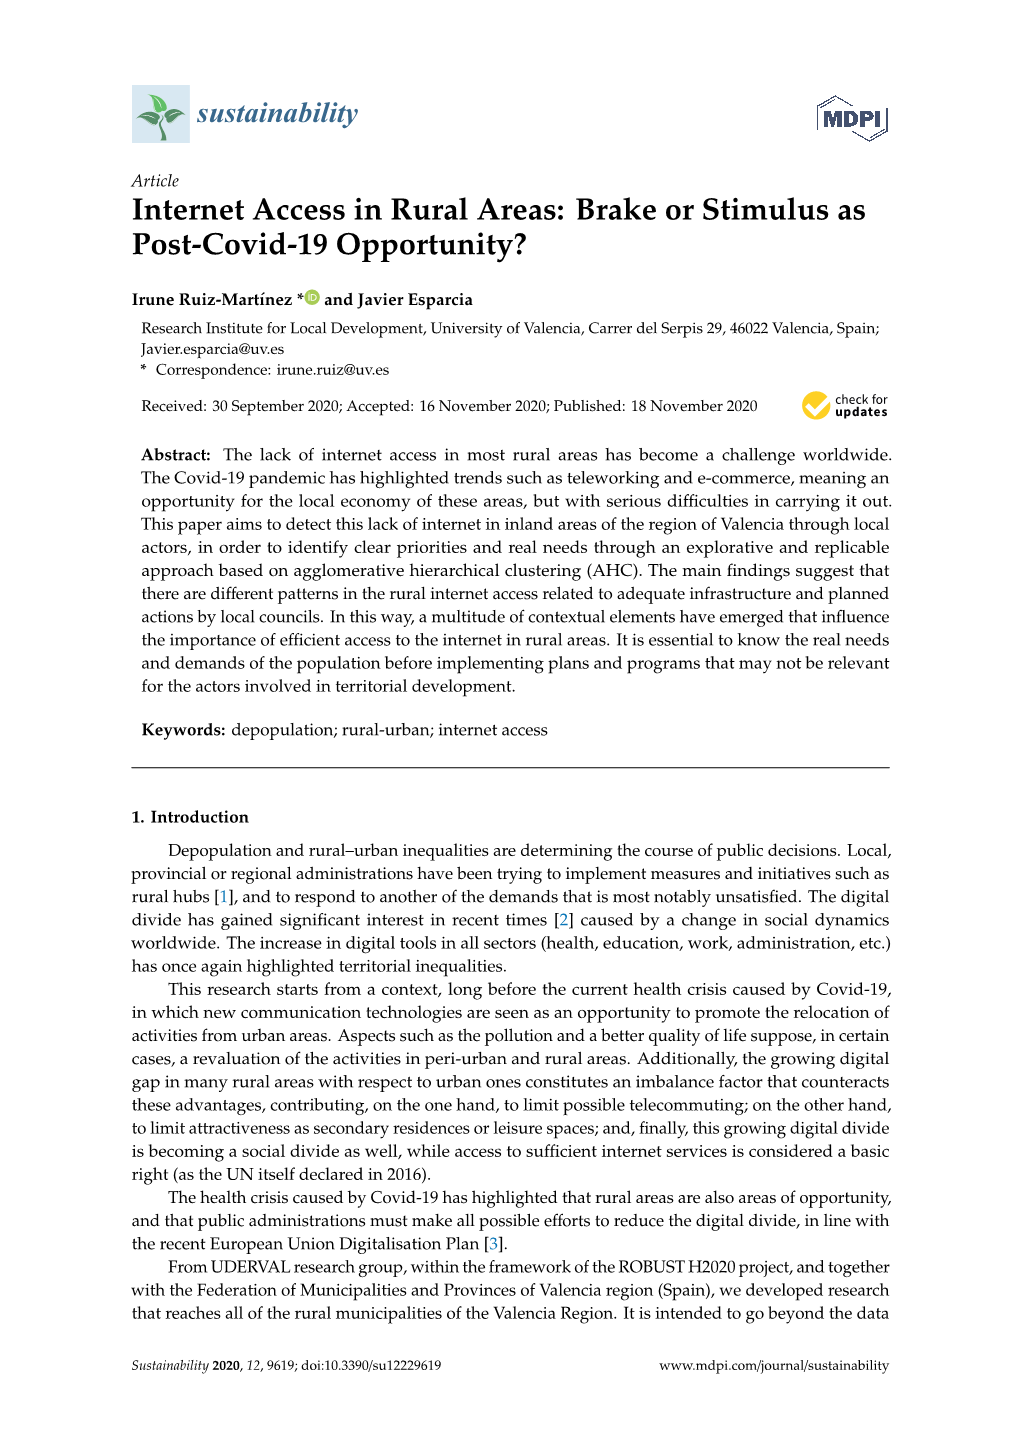 Internet Access in Rural Areas: Brake Or Stimulus As Post-Covid-19 Opportunity?